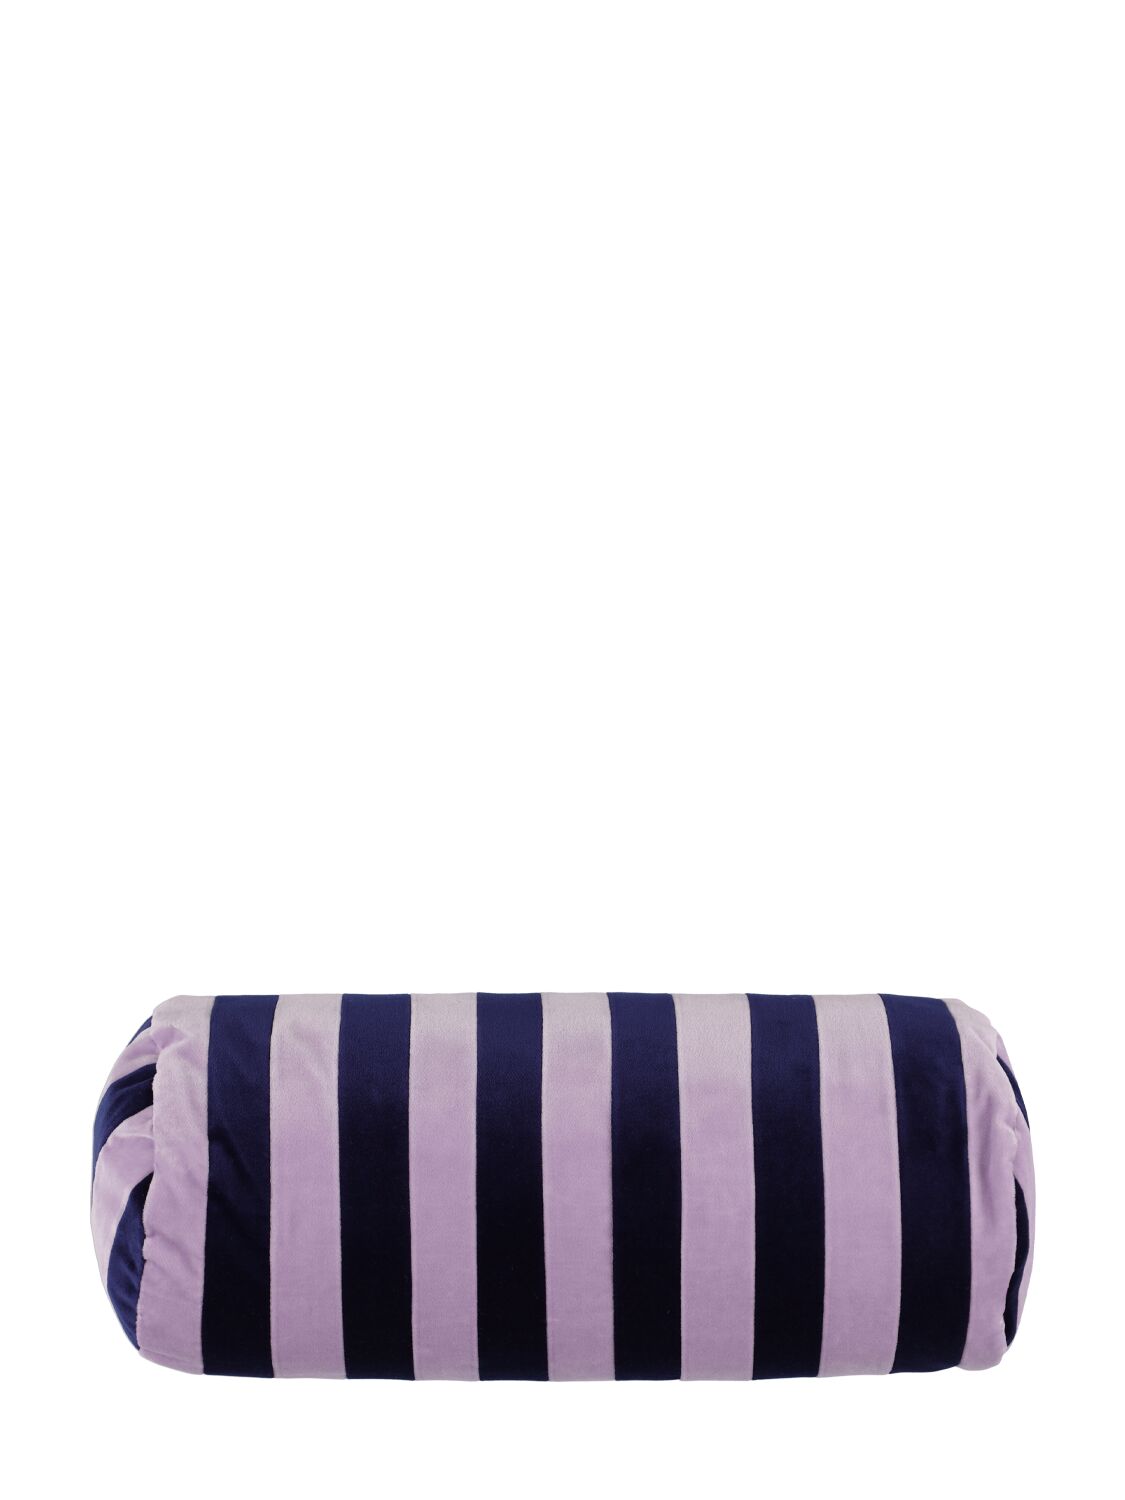 Christina Lundsteen Striped Bolster Cushion In Purple